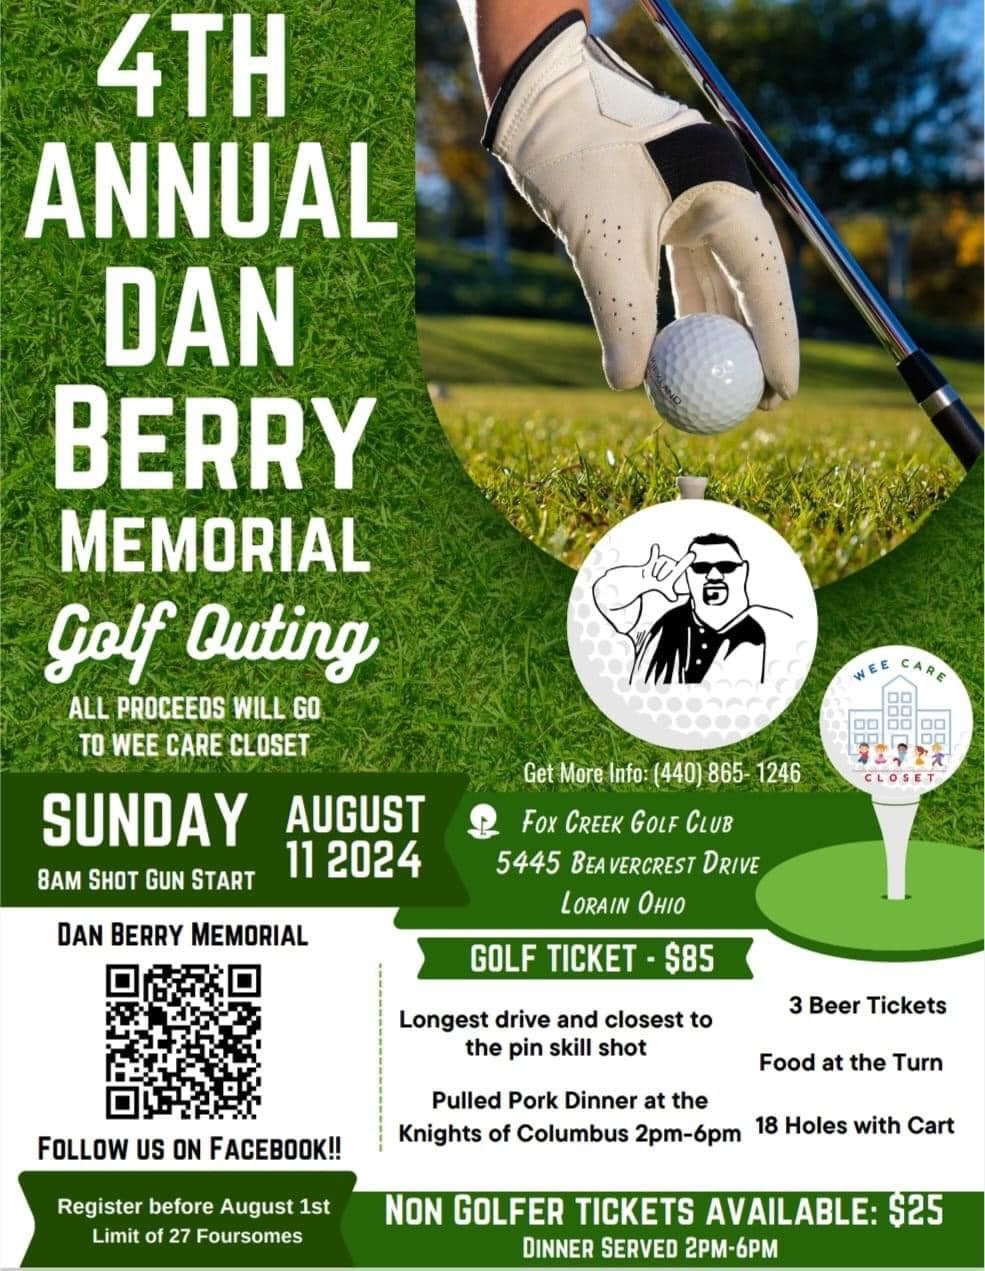 4th Annual Dan Berry Memorial Golf Outing, Dinner, and Raffle